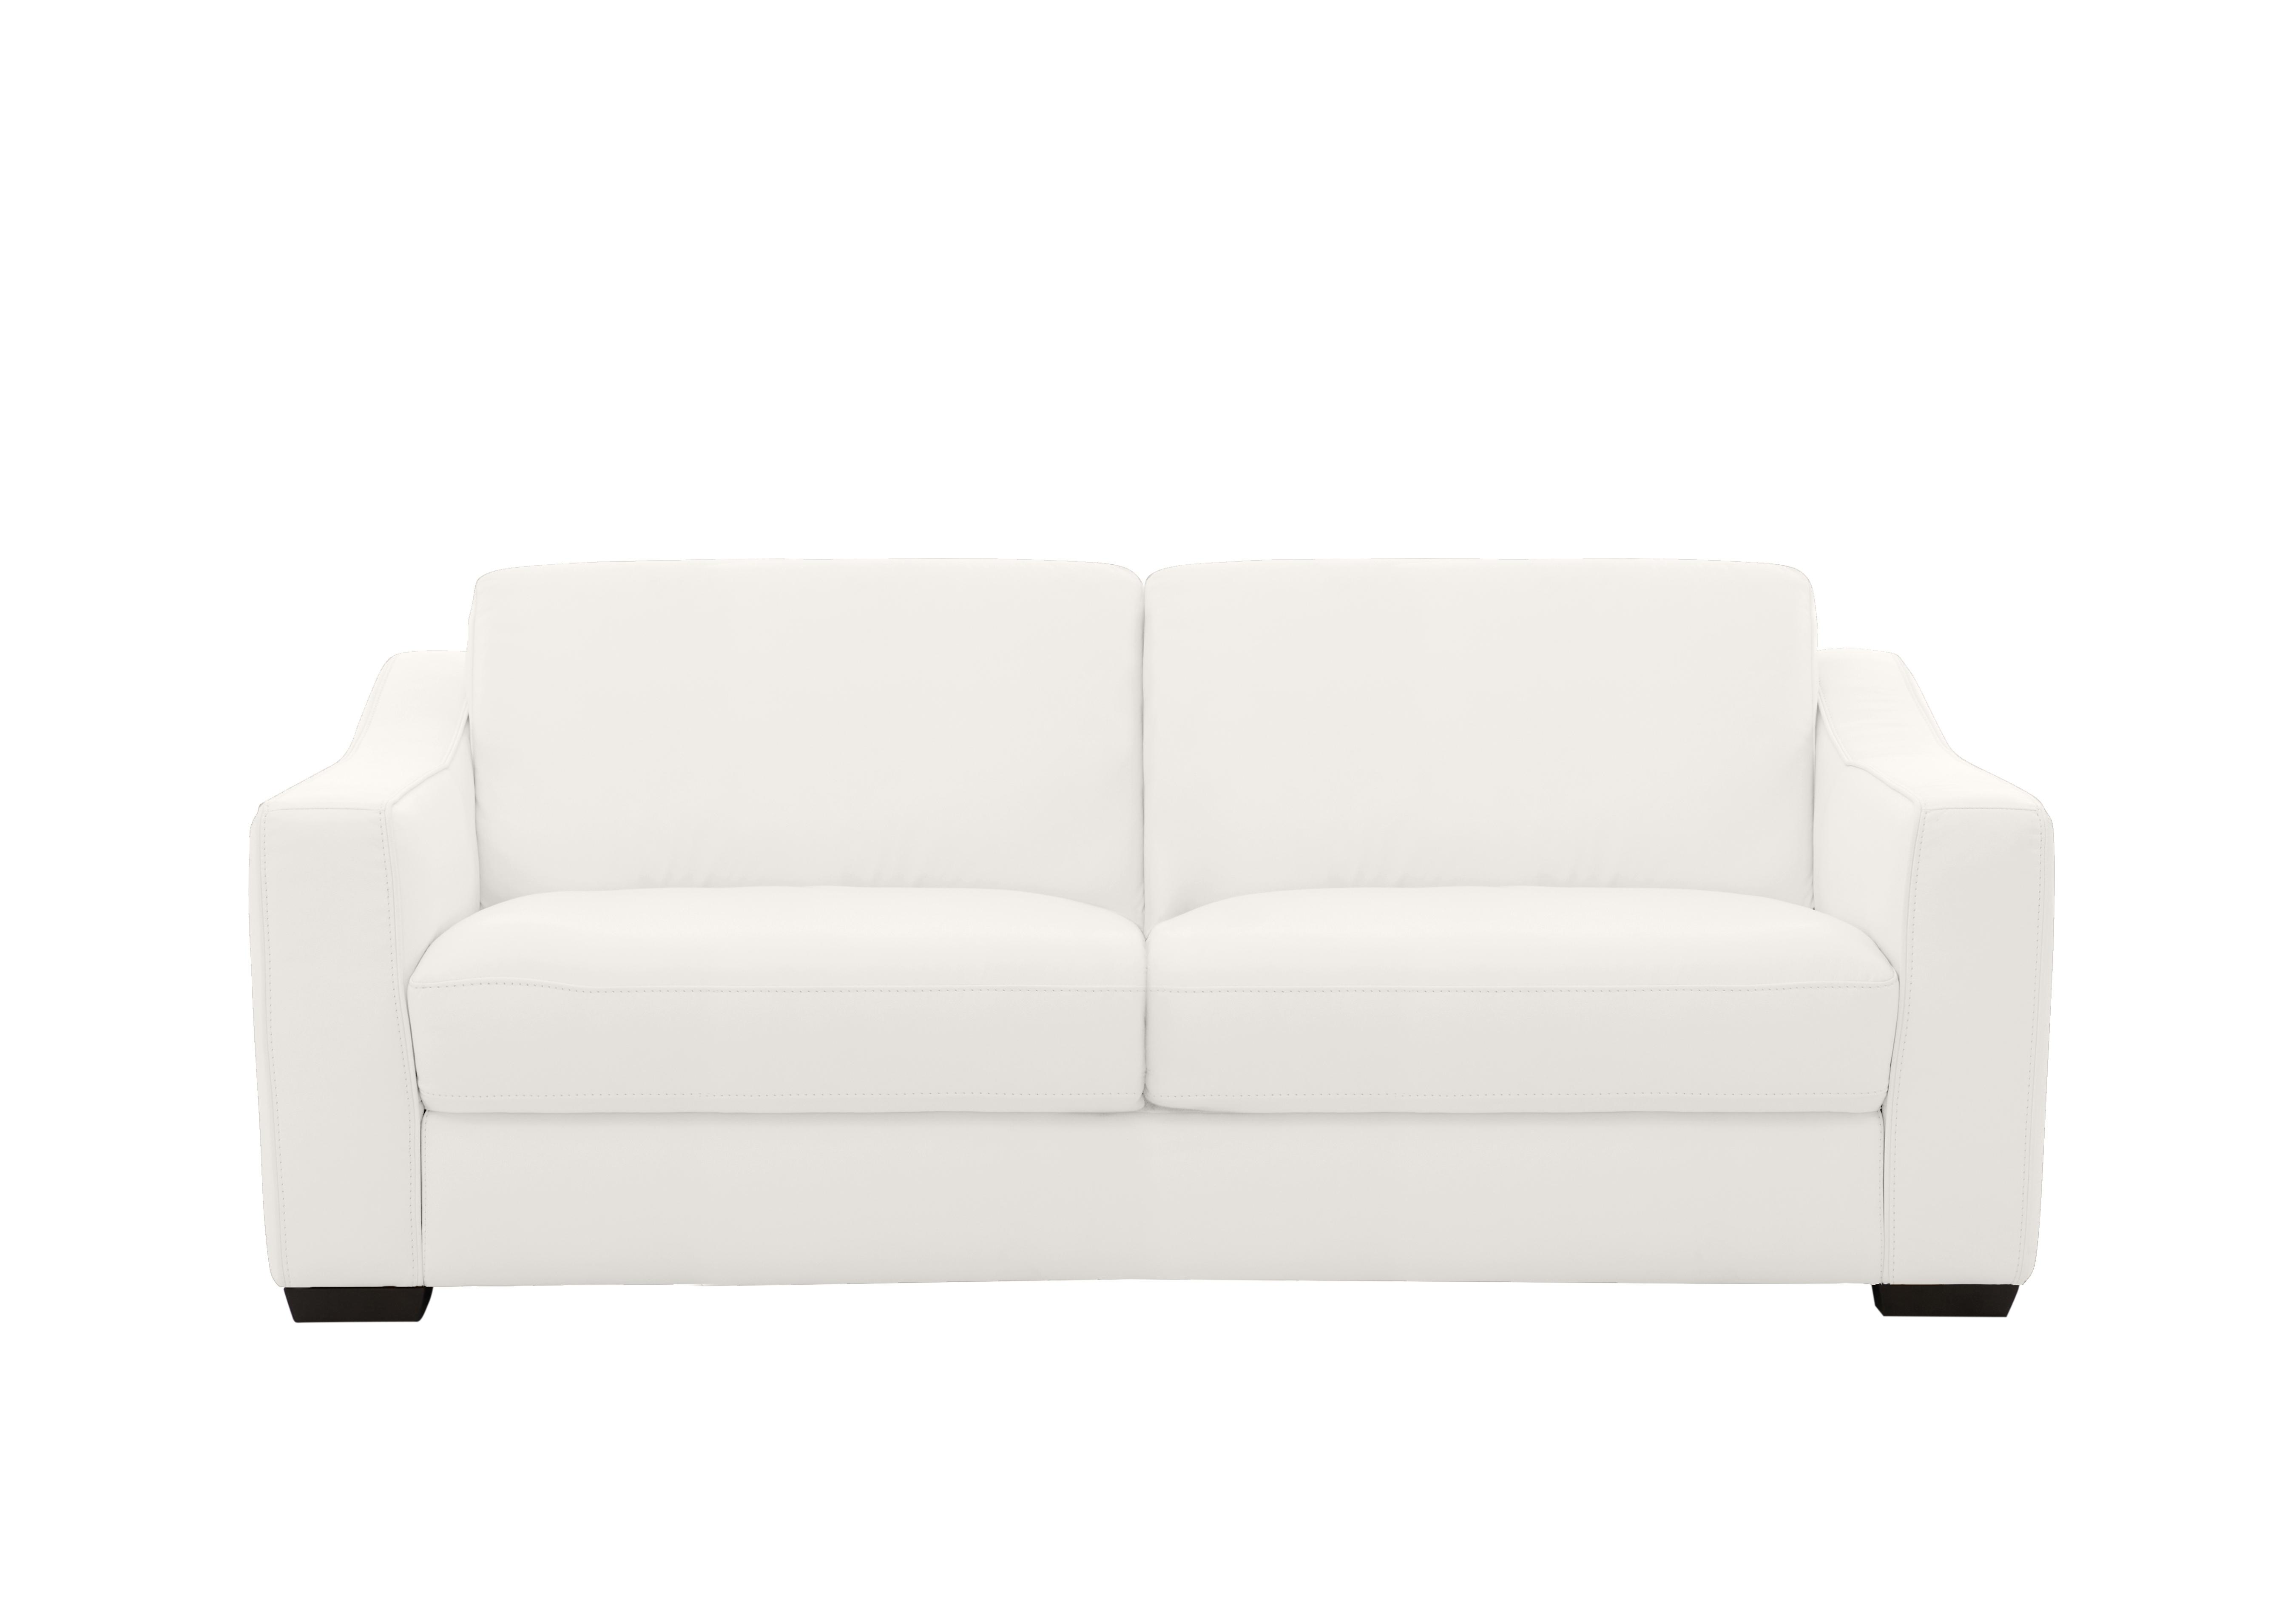 Optimus 3 Seater Leather Sofa in Bv-744d Star White on Furniture Village